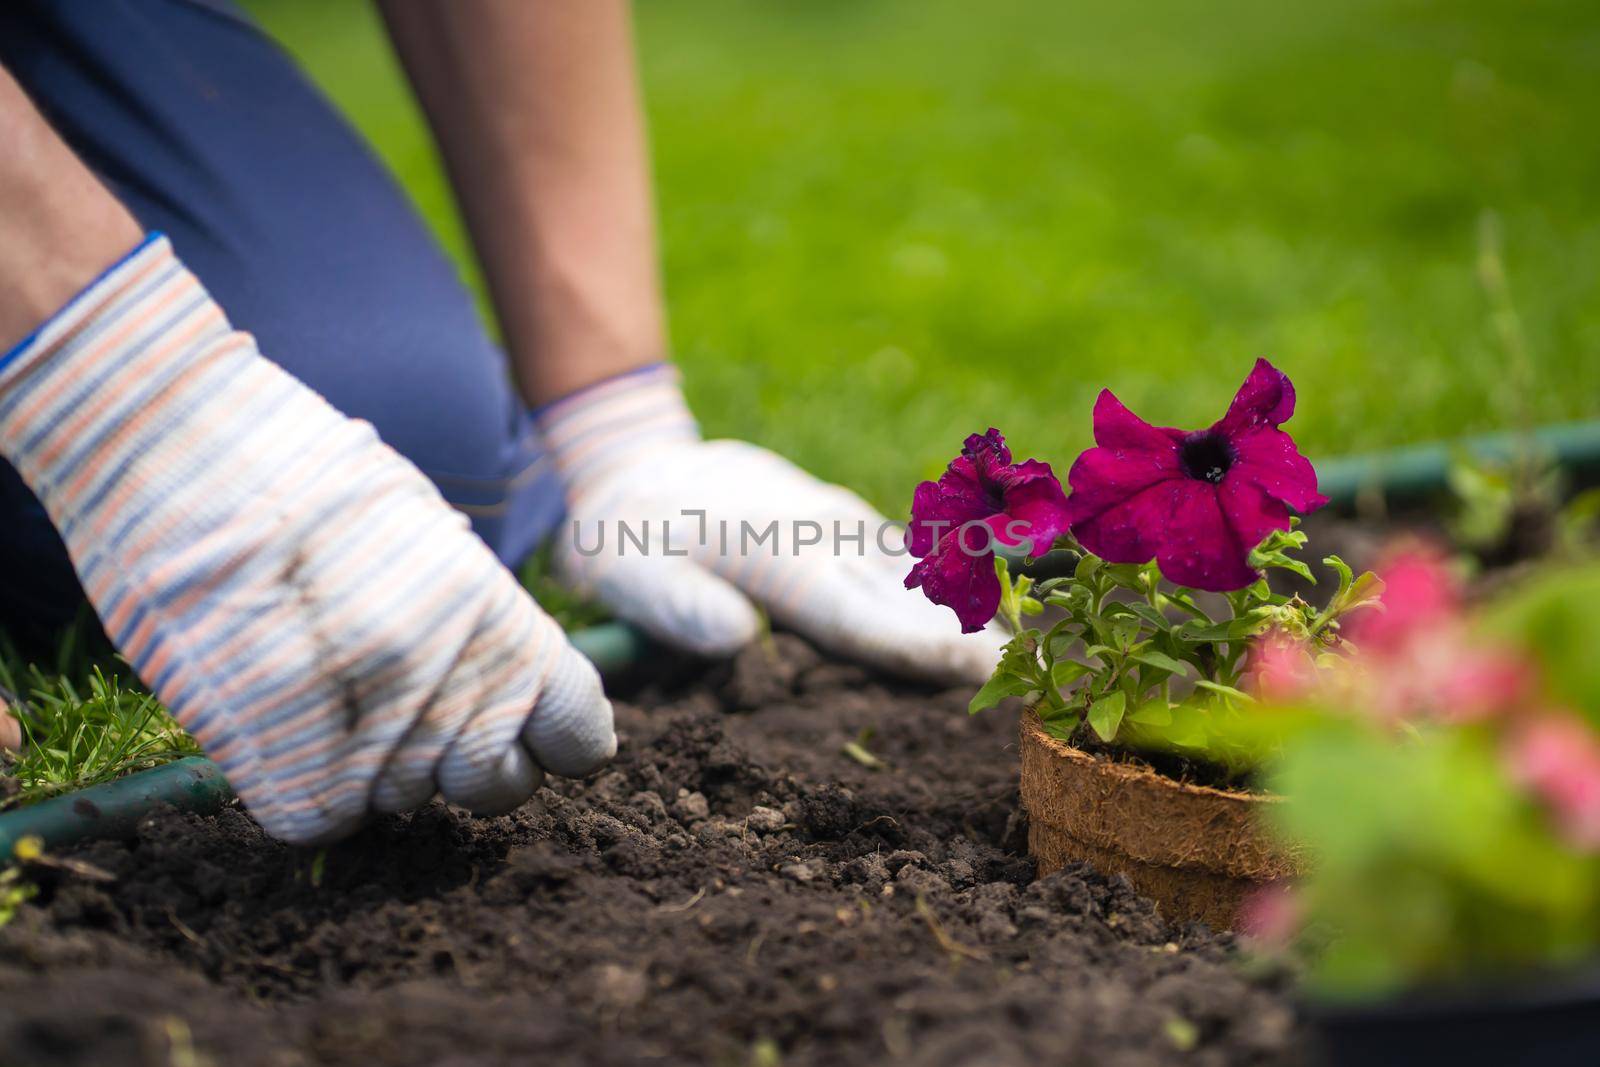 A closeup of hands in gloves engaged in gardening work, preparing the earth in a garden for planting flower seedlings, plant seeds. A professional gardener cultivates plants, farms penutia